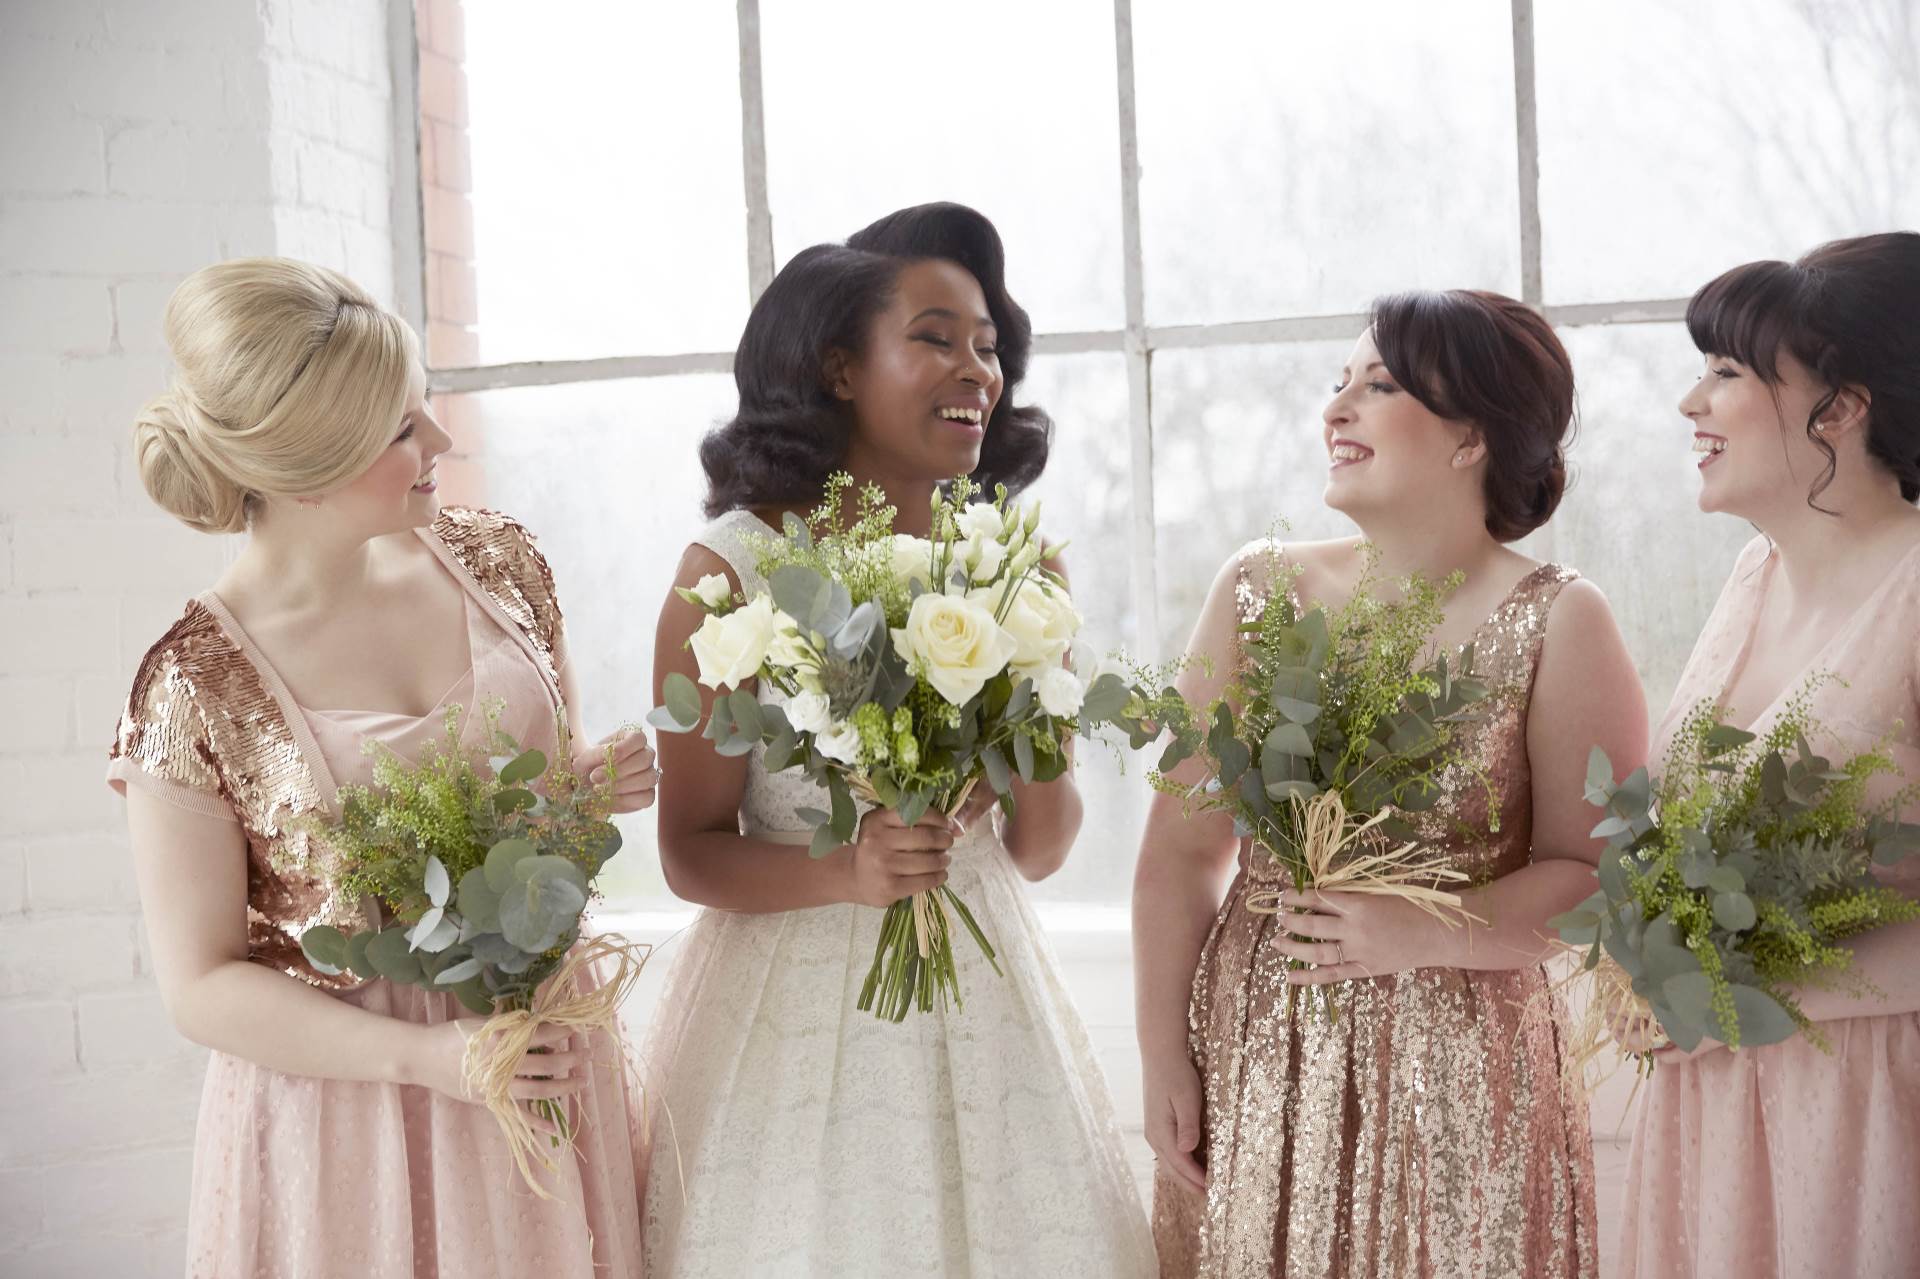 How to choose vintage style bridesmaid dresses for all body shapes by Joanie